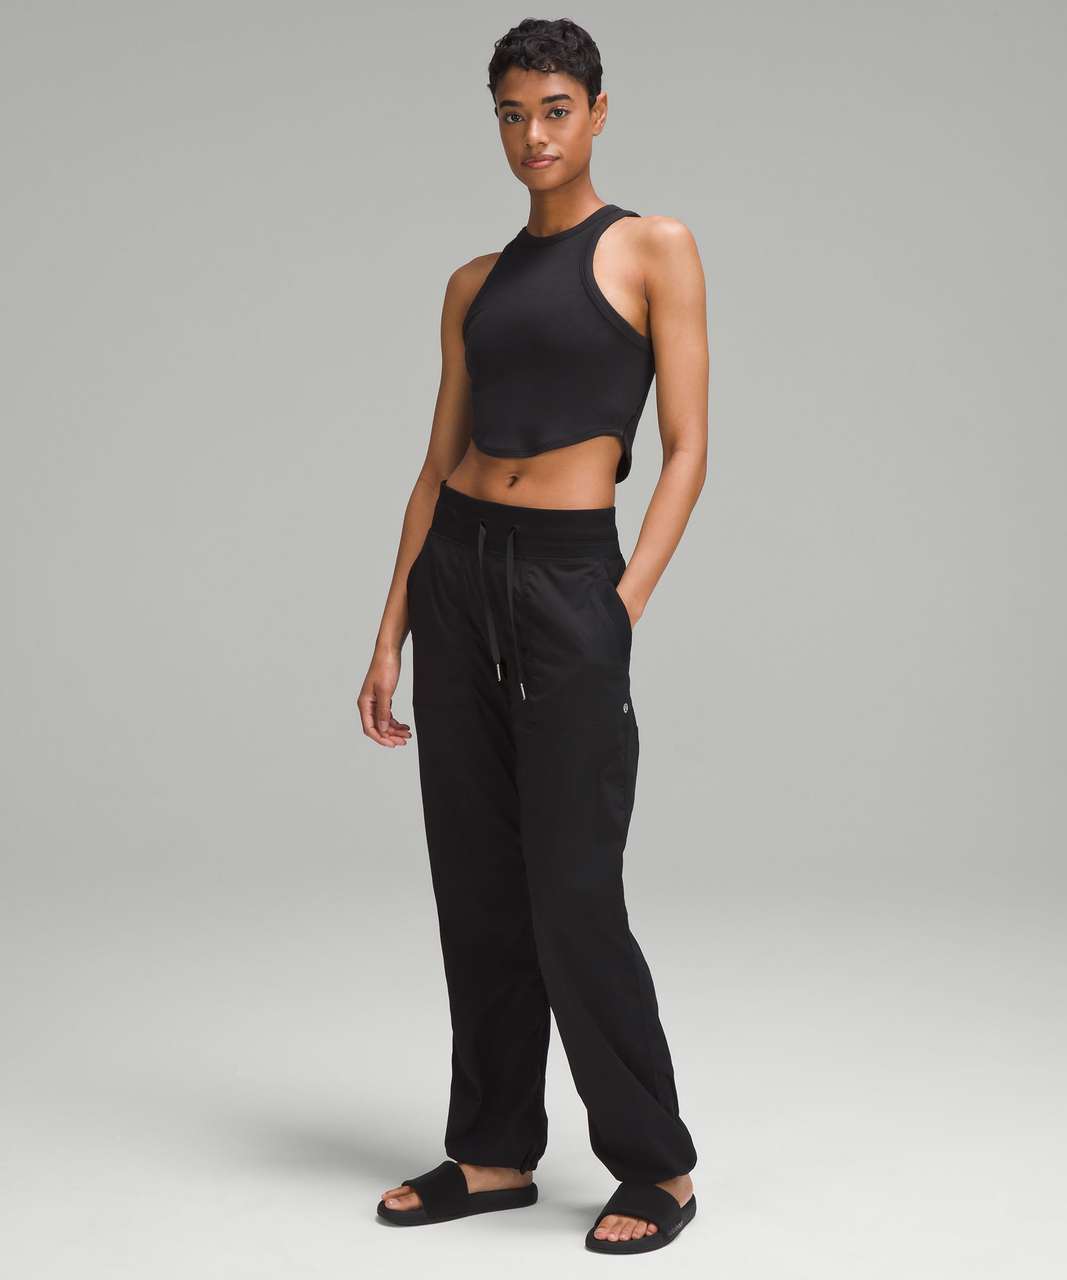 Lululemon Hold Tight Cropped Tank Top - Black